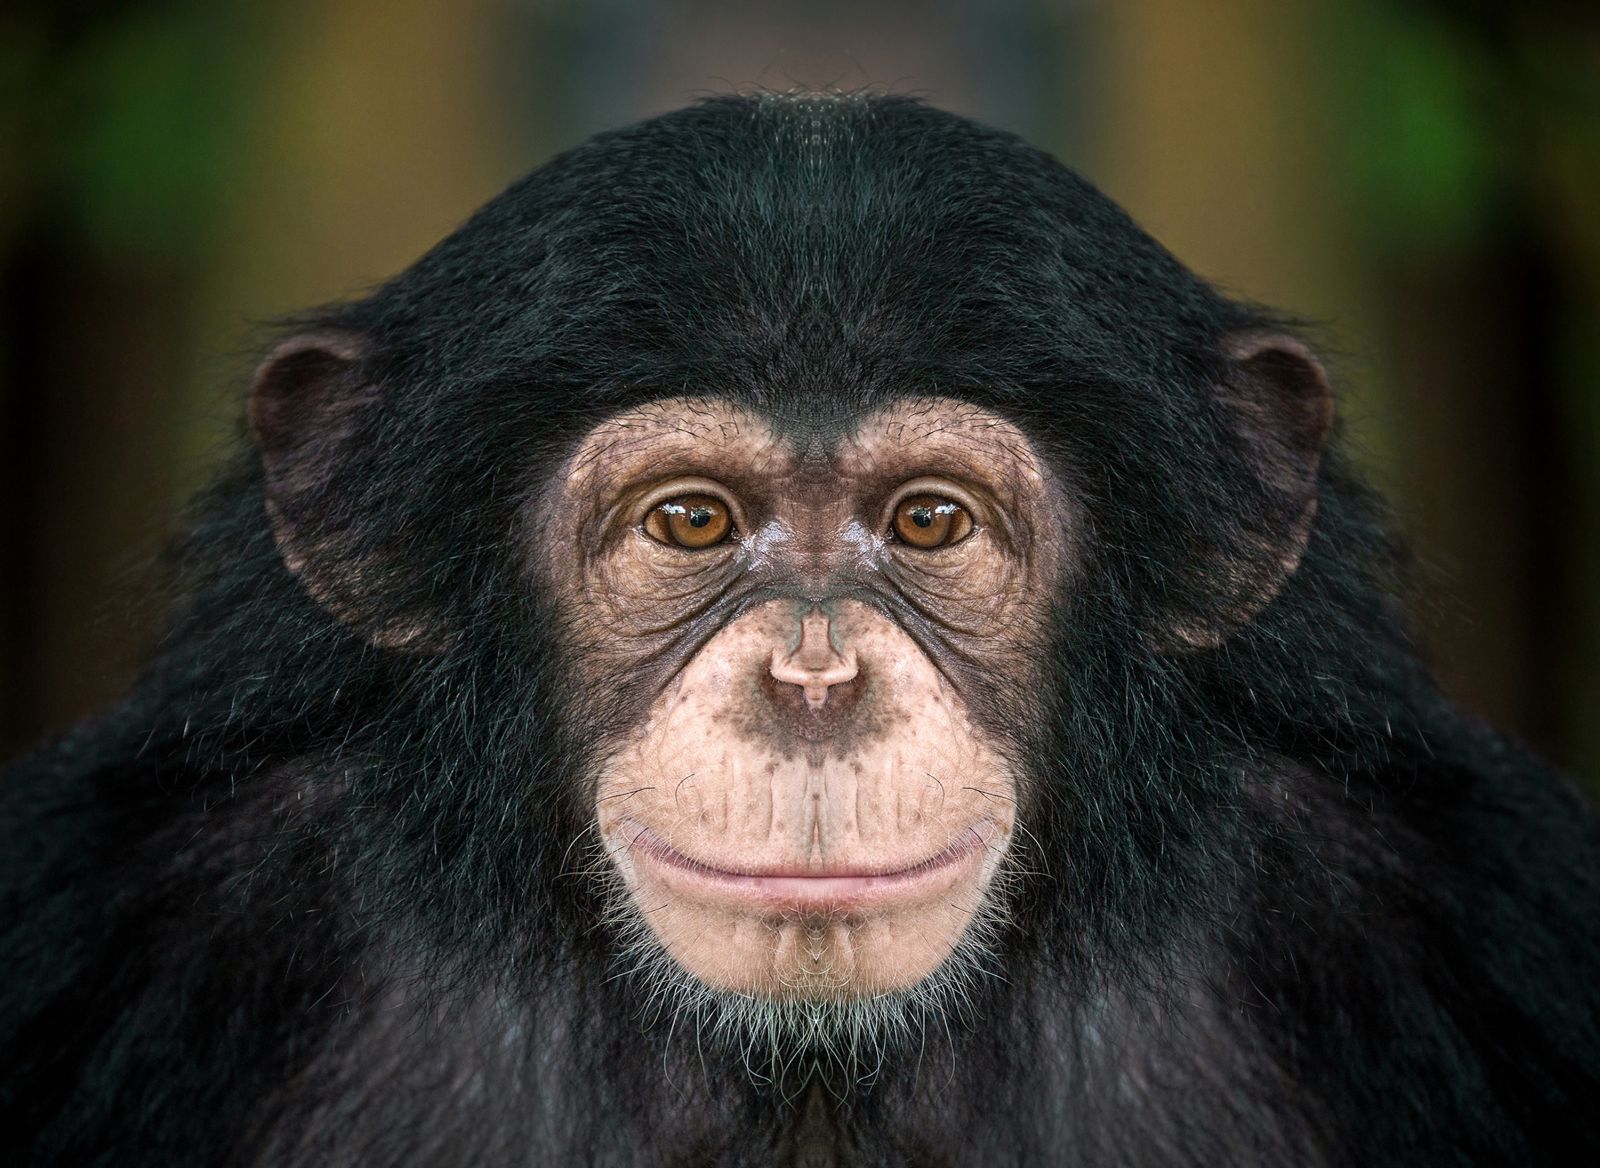 The face of a chimpanzee looking straight at the camera 